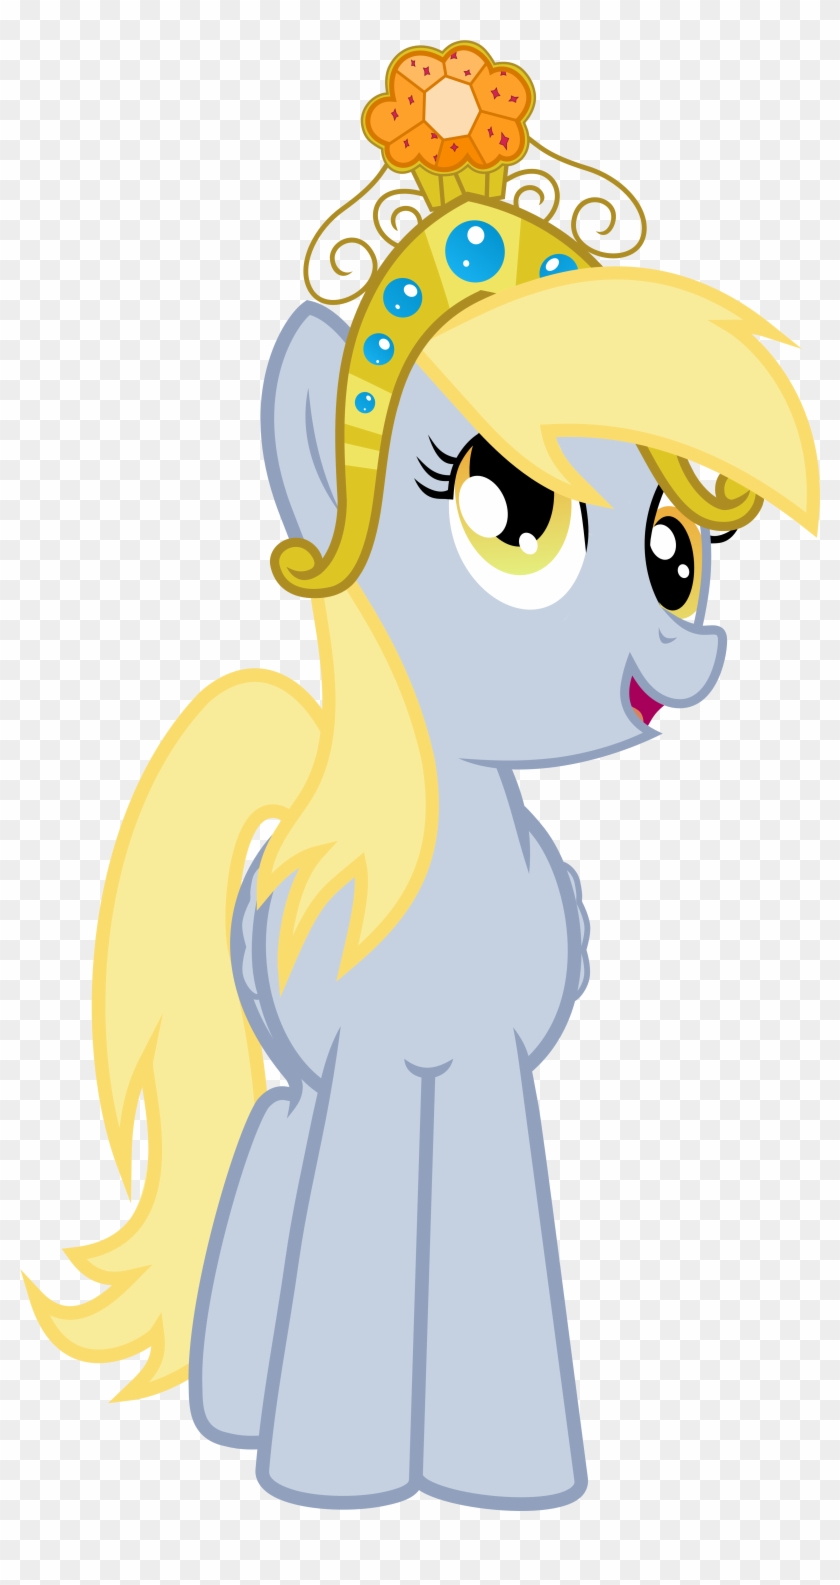 Derpy In Her Big Crown Thingy - My Little Pony: Friendship Is Magic #746092